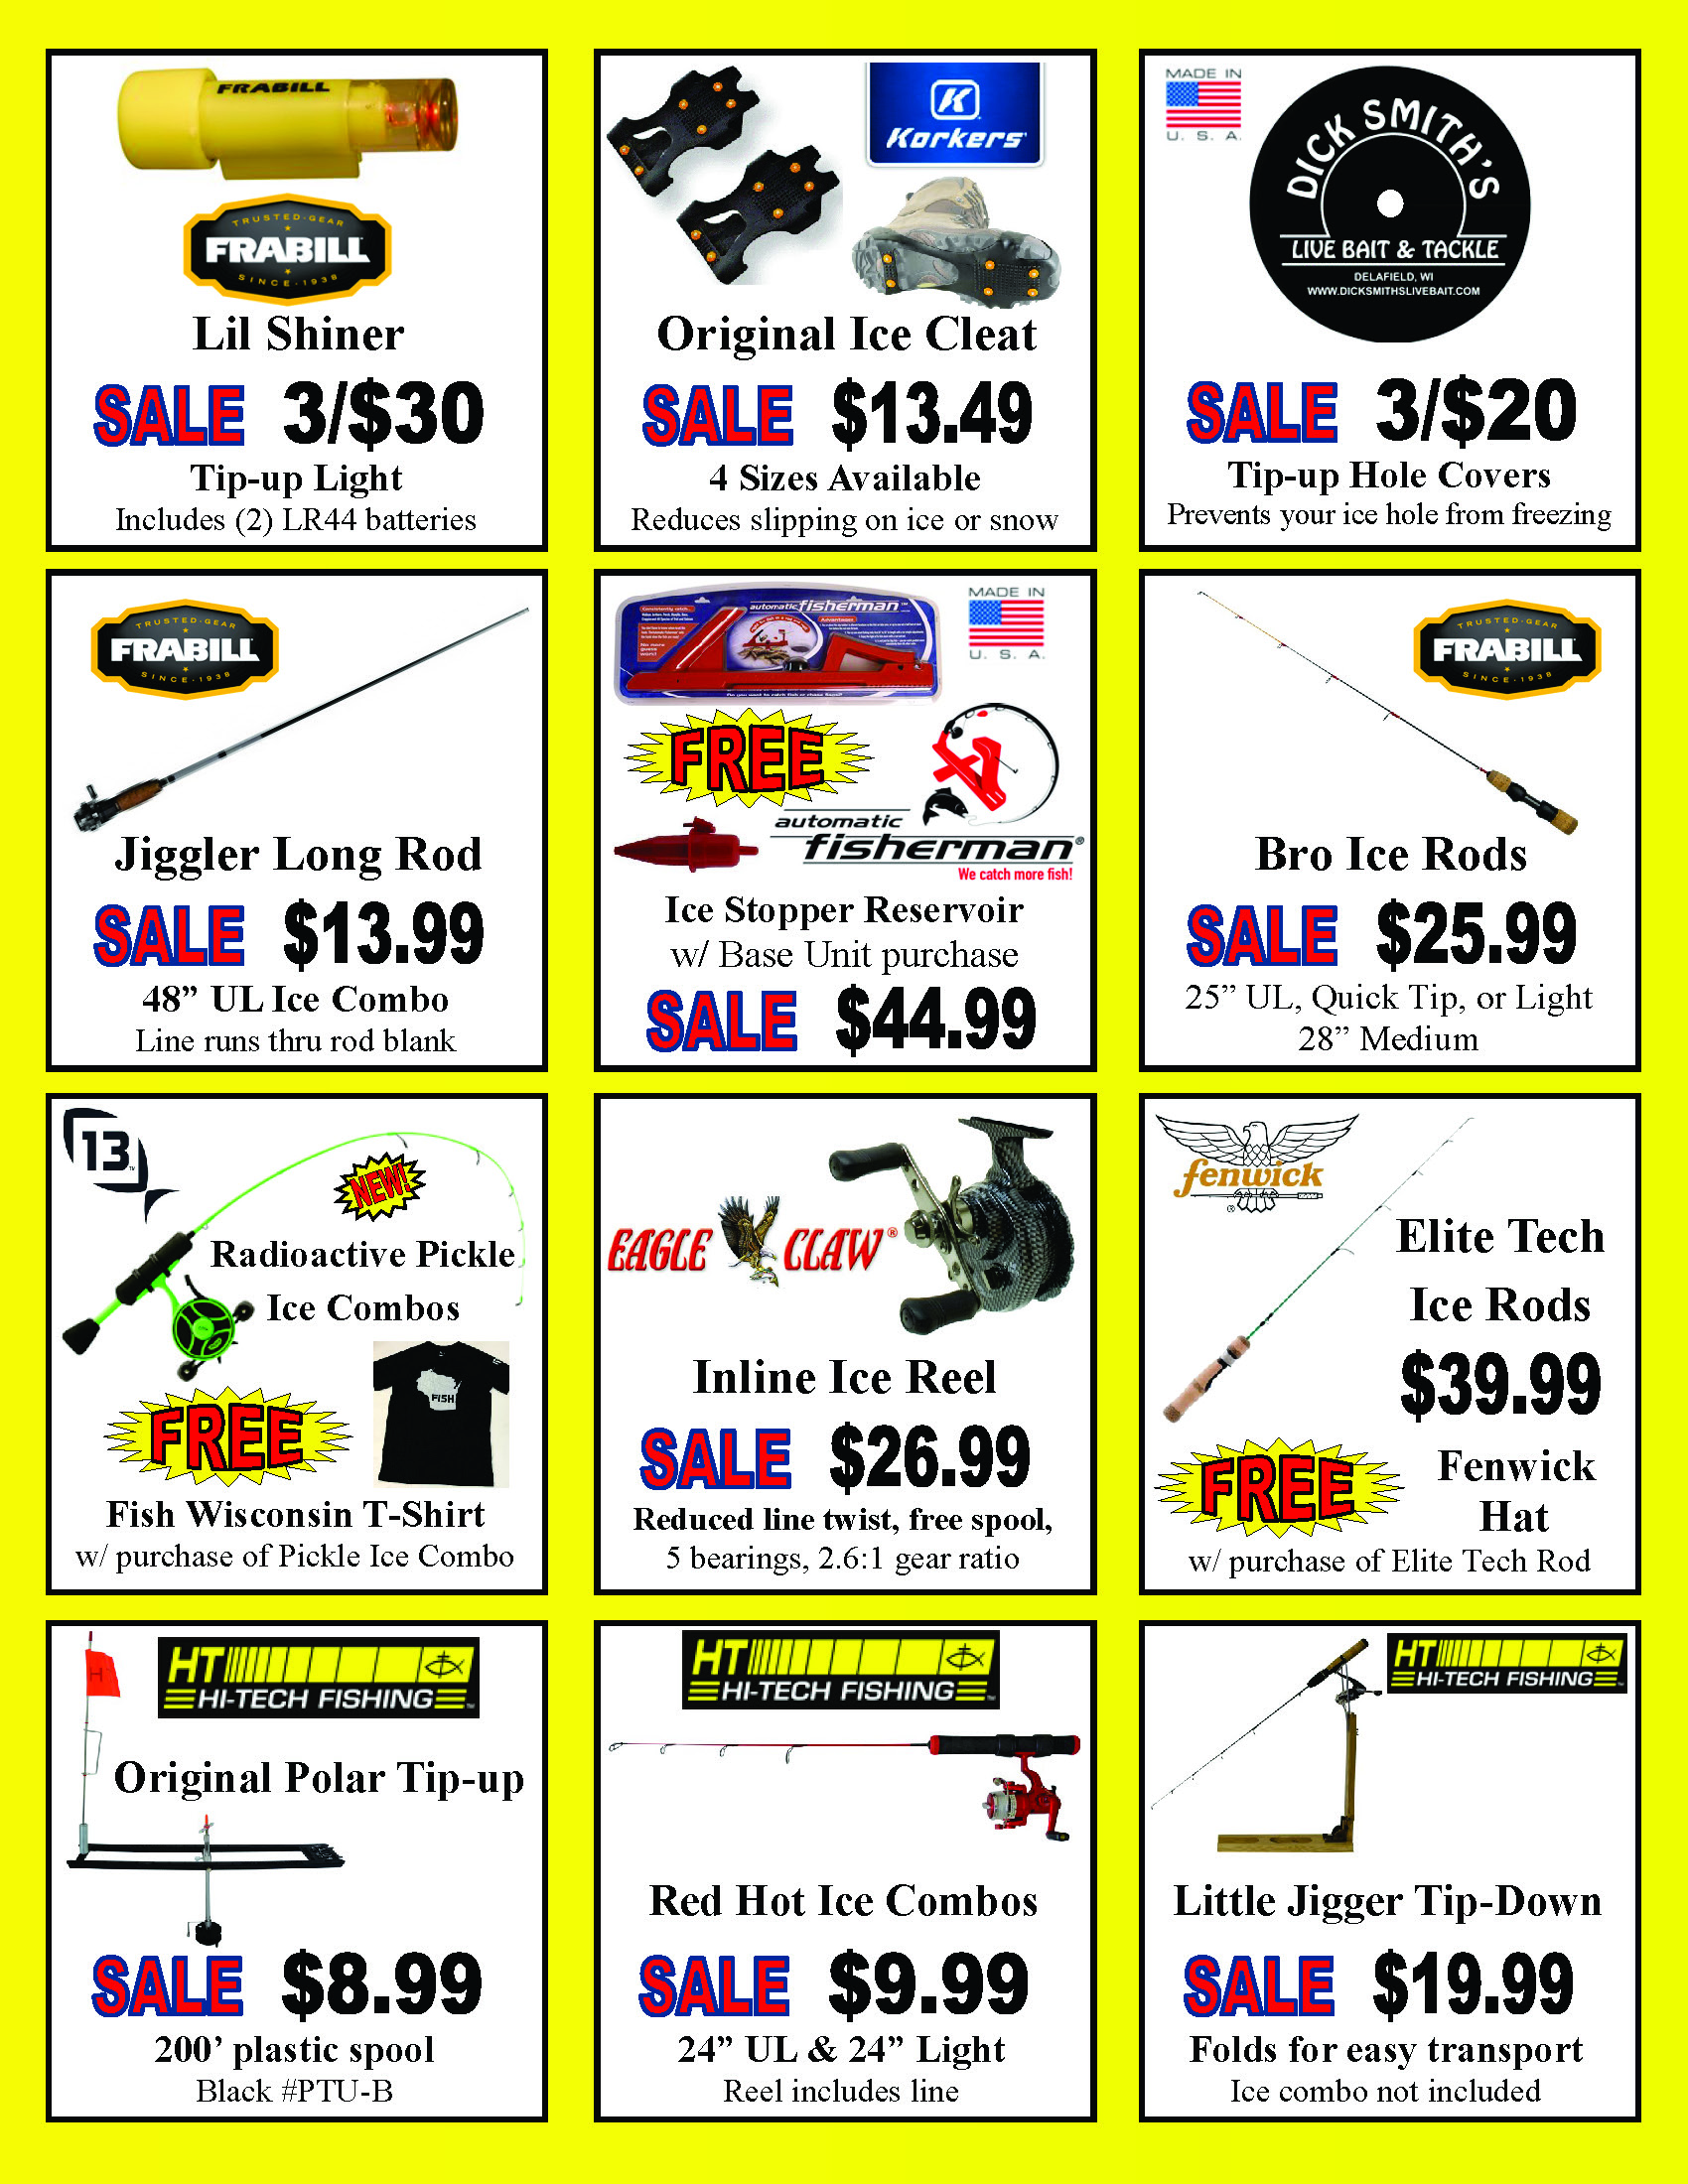 Anniversary Flyer 36_new_Page_4 - Dick Smith's Live Bait & Tackle